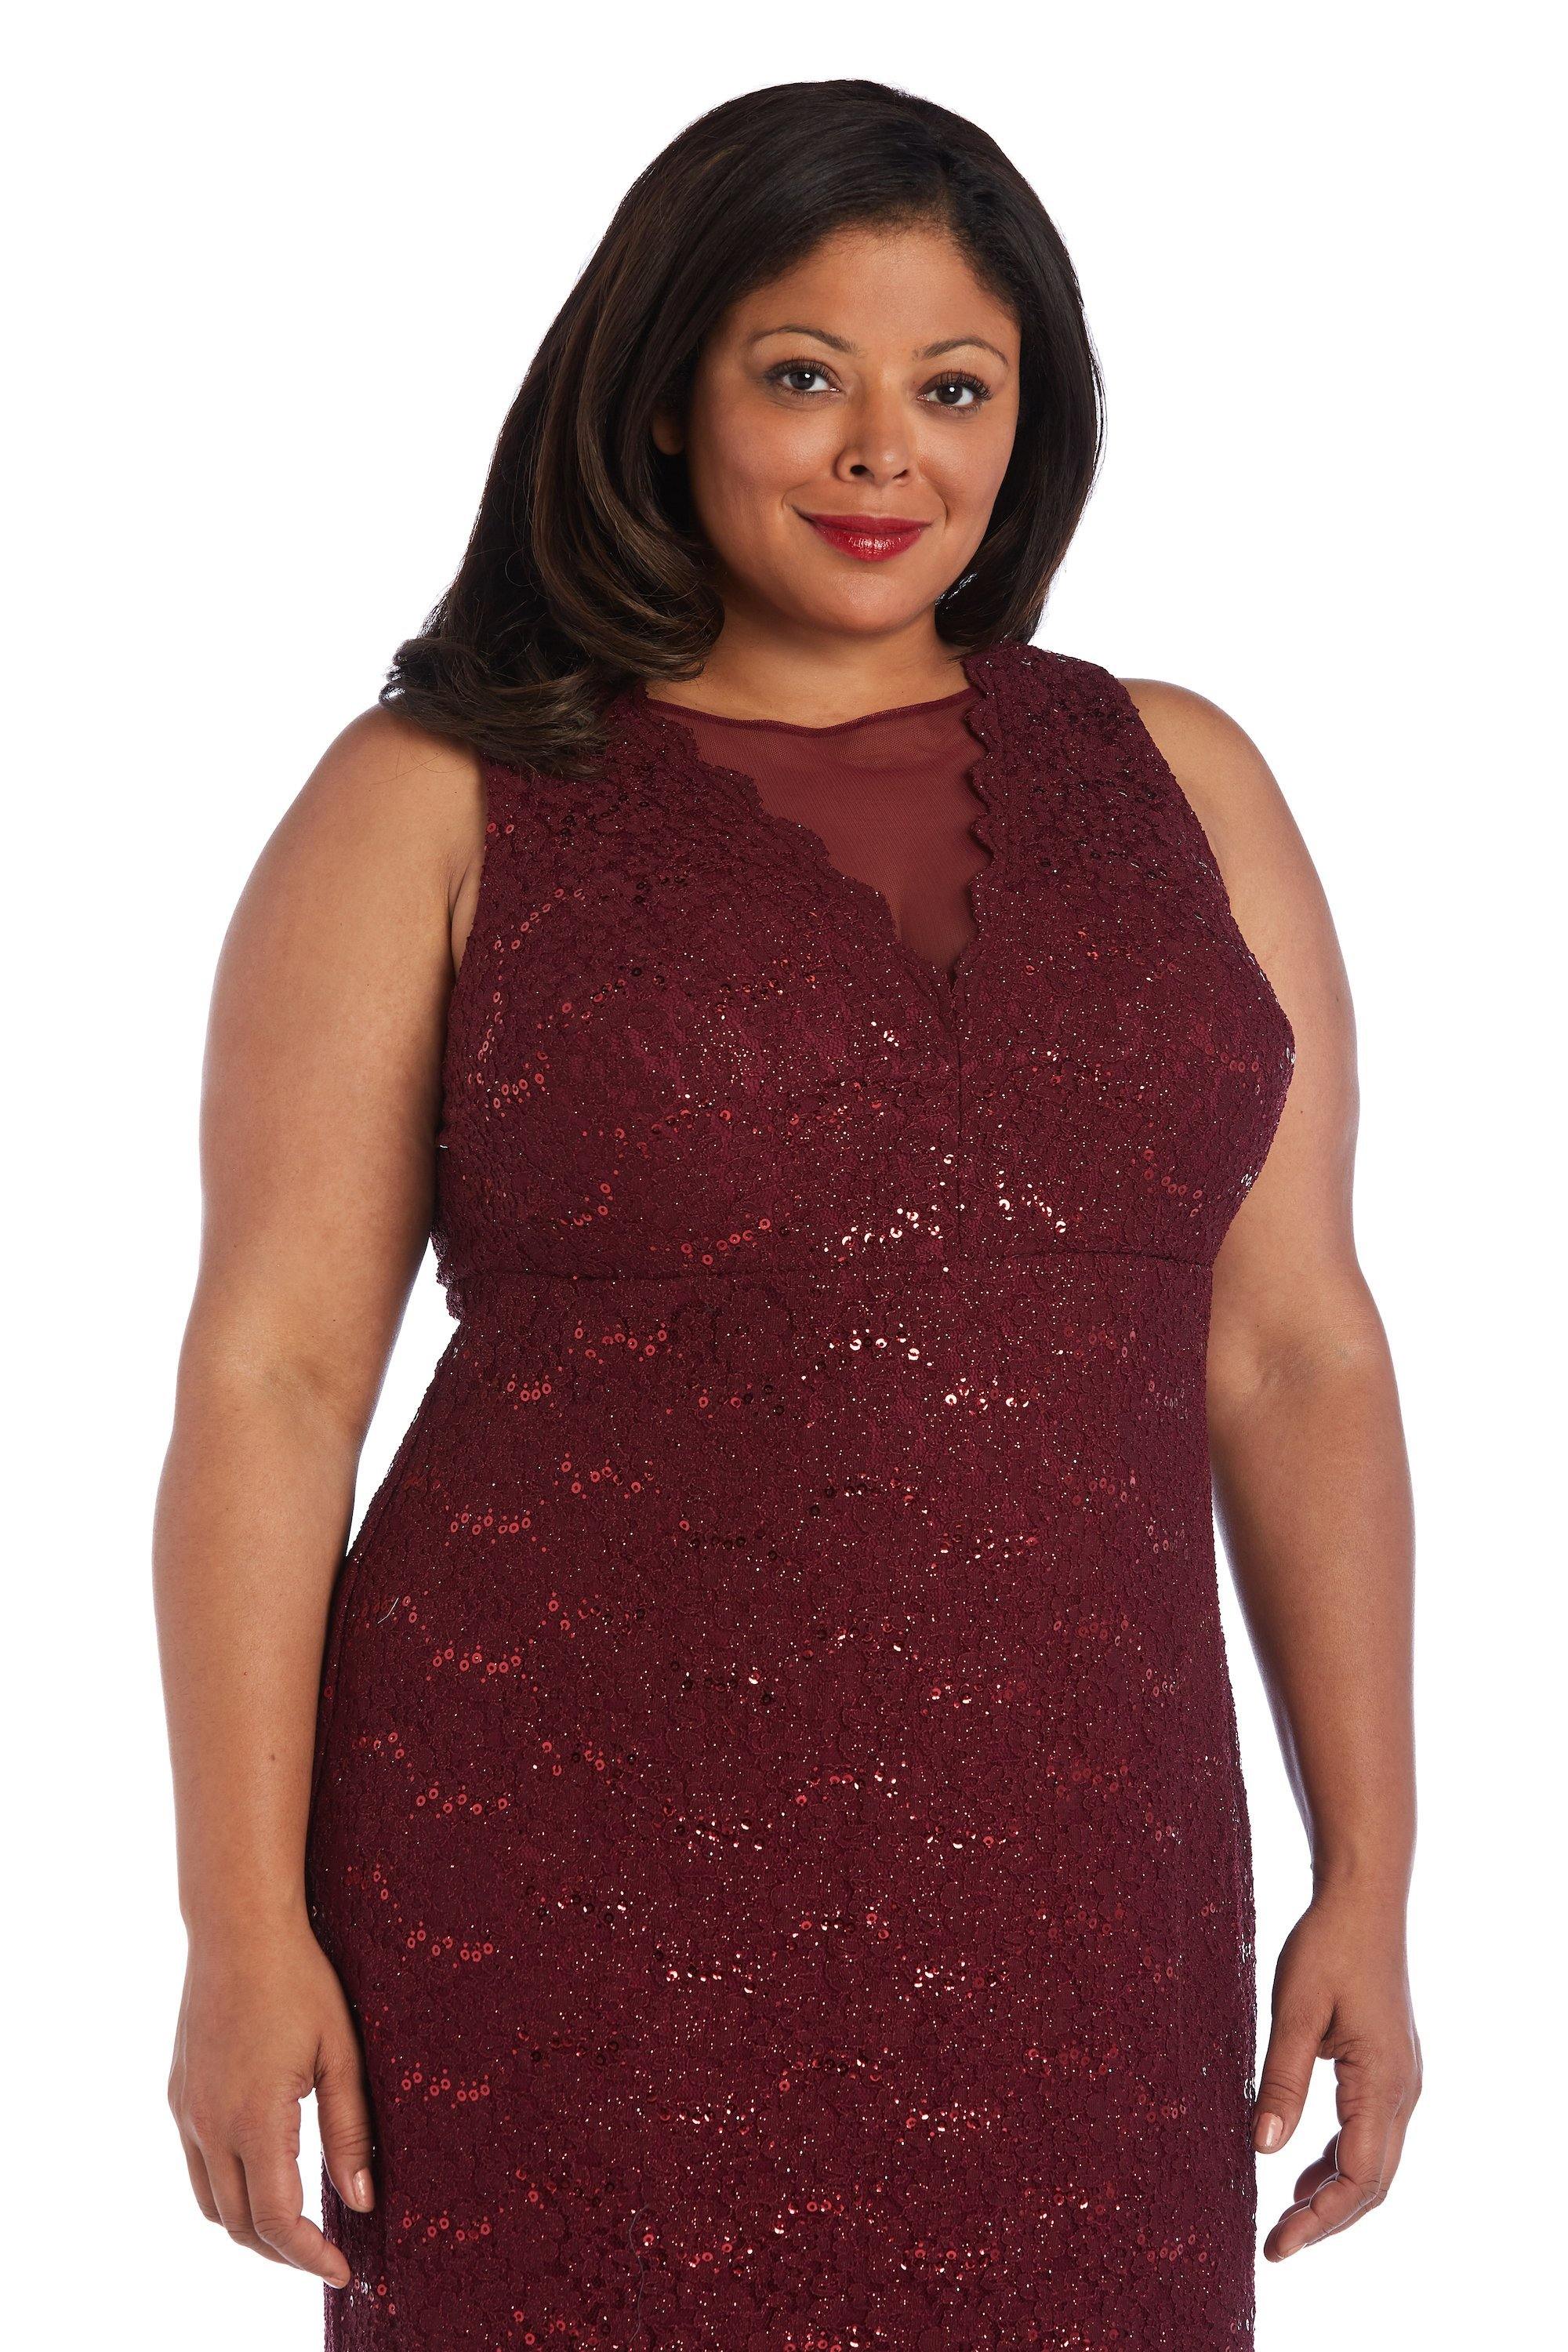 Nightway Short Plus Size Cocktail Lace Dress 21500W - The Dress Outlet